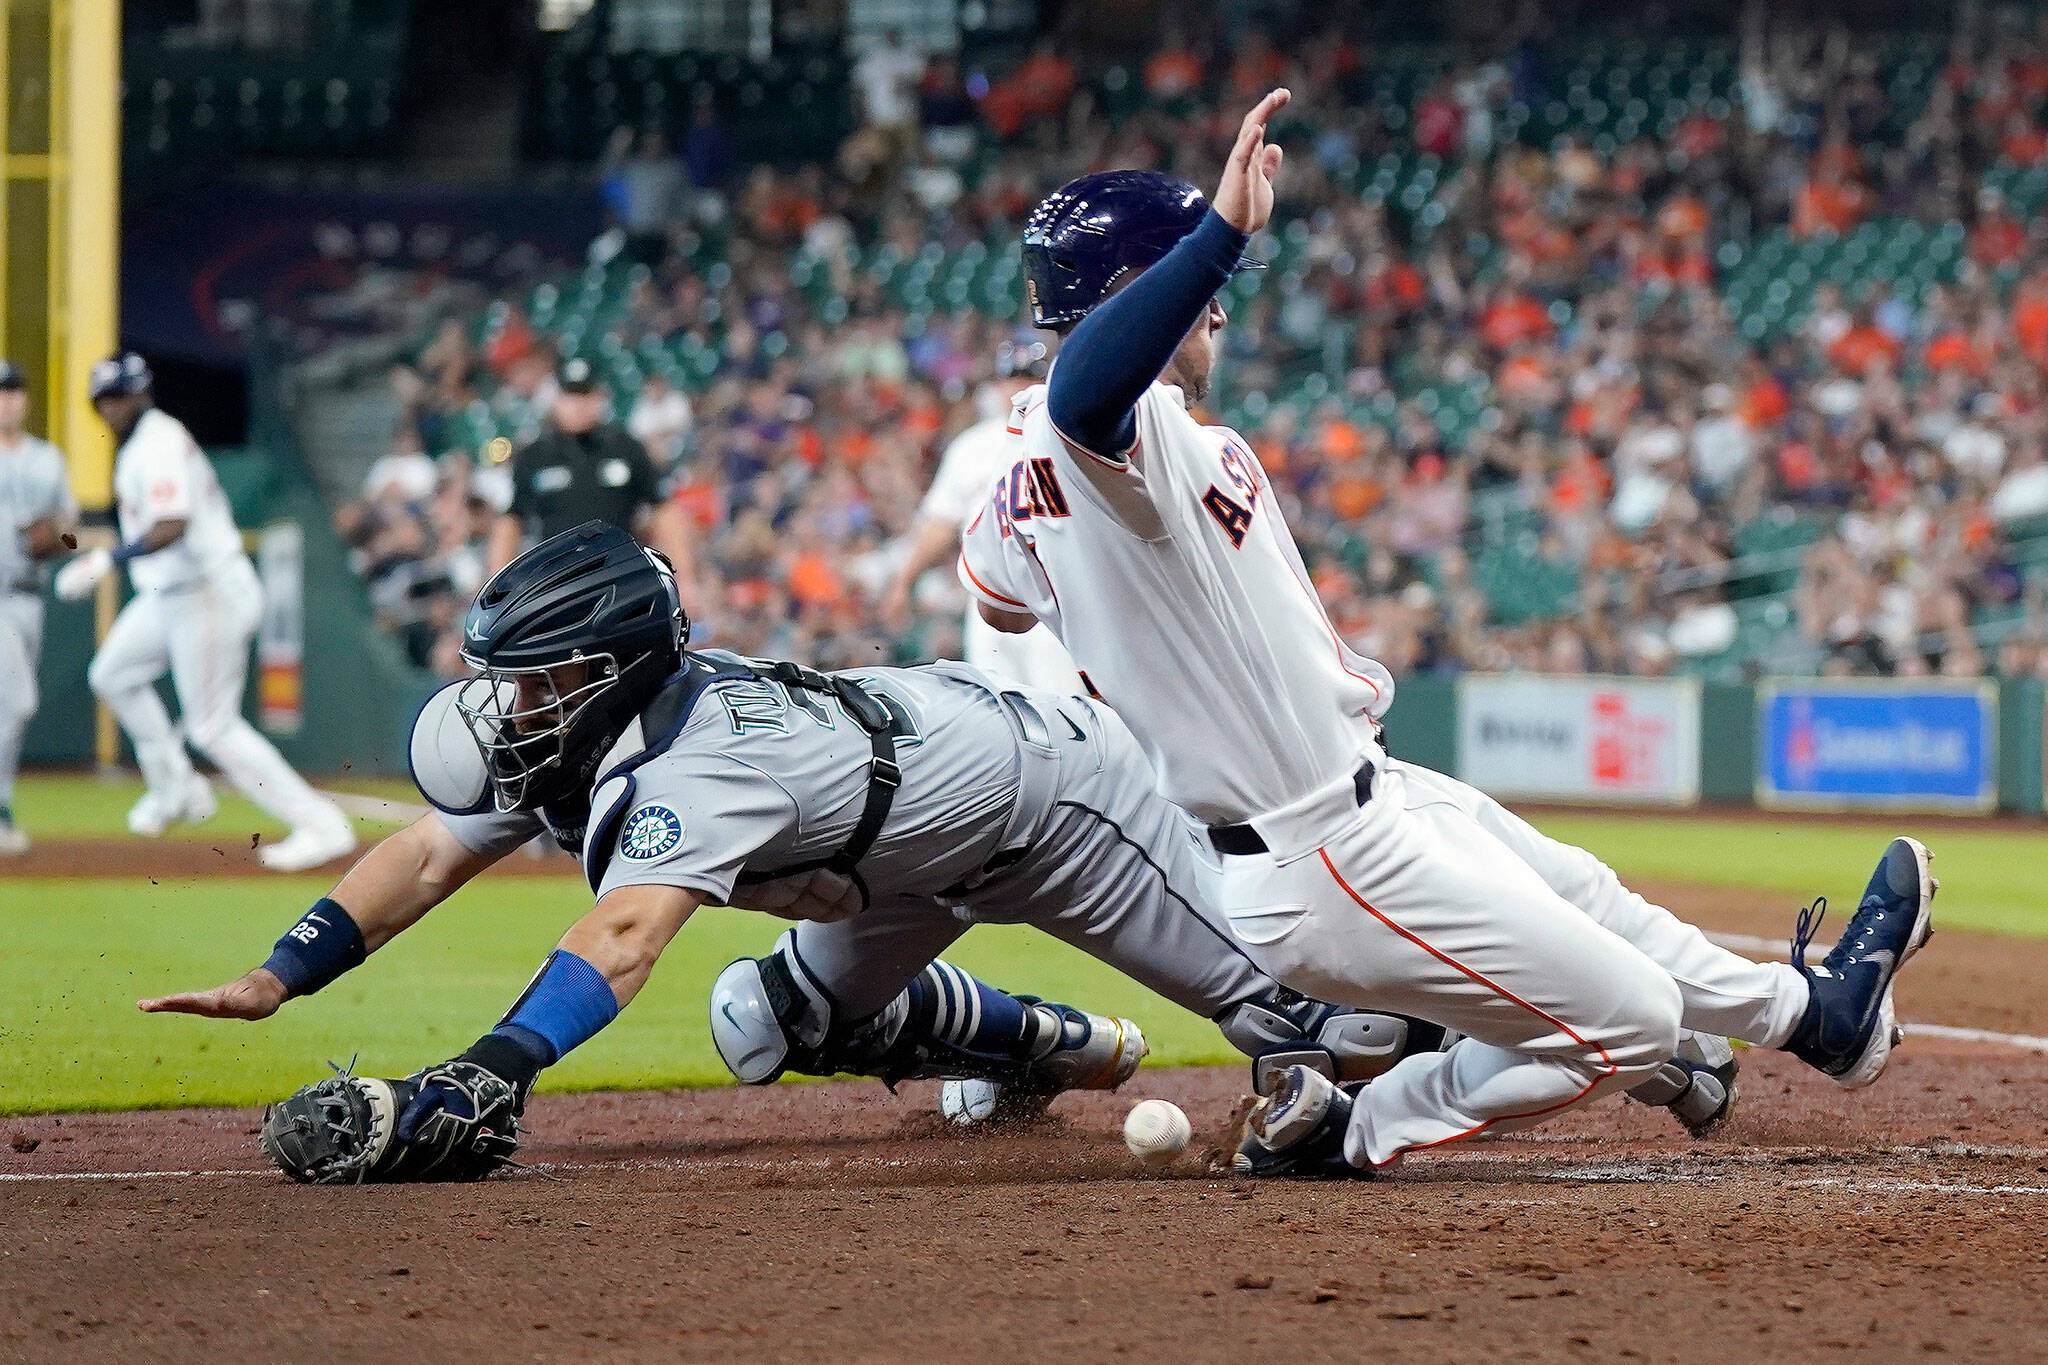 Mariners catcher Luis Torrens (left) reaches for the ball as the Astros’ Alex Bregman scores during the sixth inning of a game Wednesday in Houston. (AP Photo/David J. Phillip)